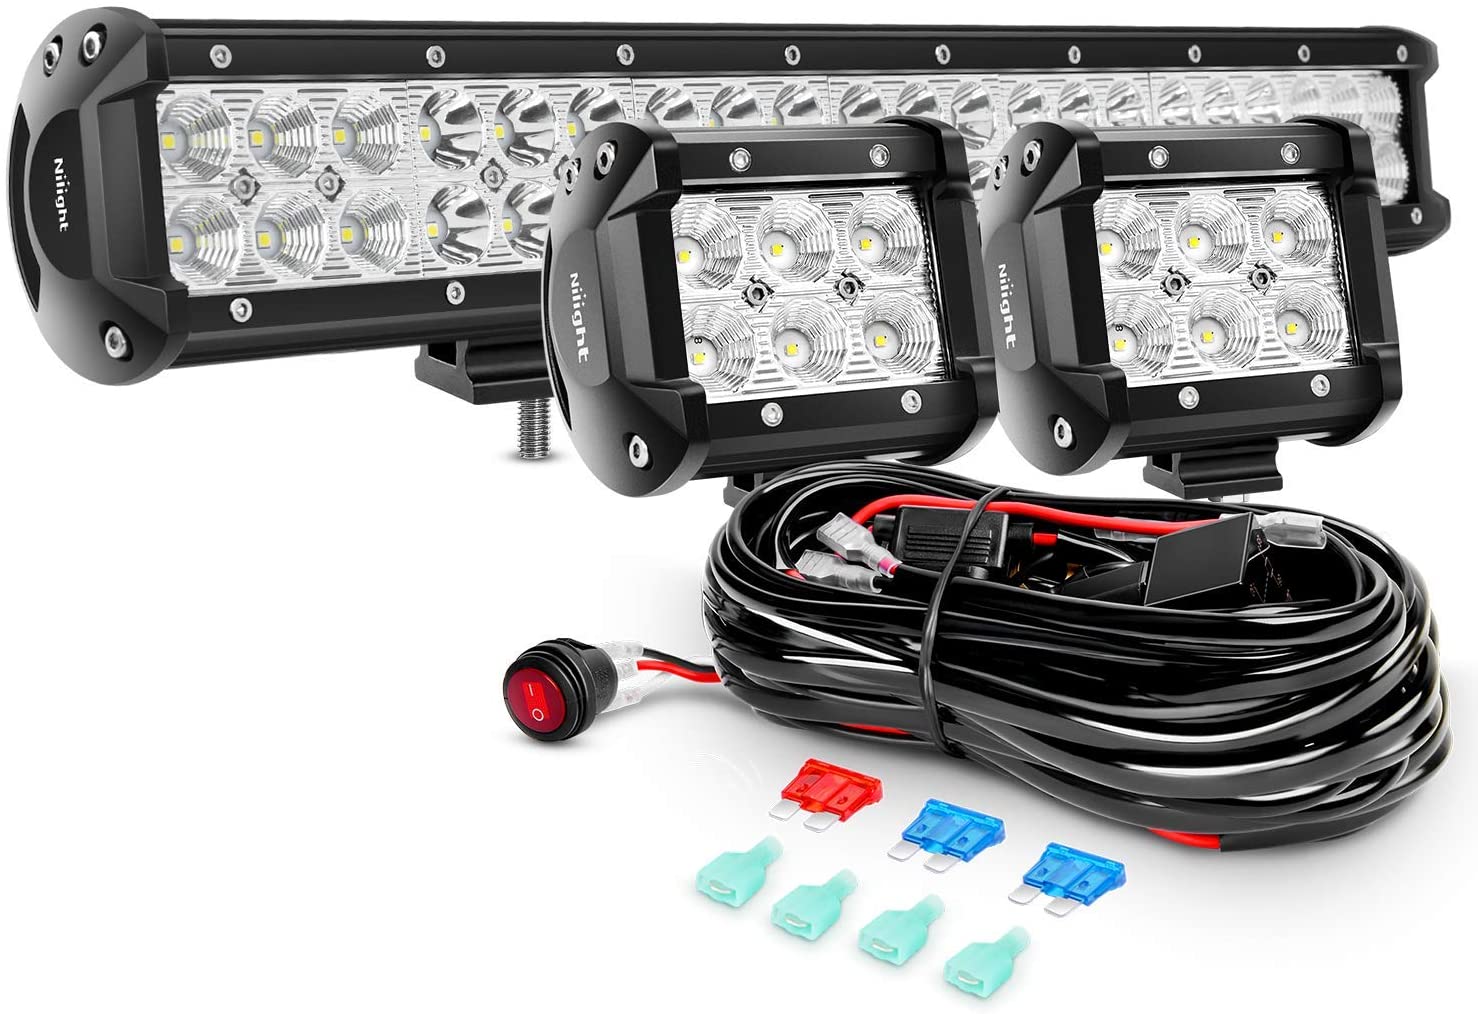 Nilight 20Inch 126W Spot Flood Combo Led Off Road Led Light Bar 2PCS 18w 4Inch Flood LED Pods With 16AWG Wiring Harness Kit-2 Lead, 2 Years Warranty (126w +18w +Wiring Harness)